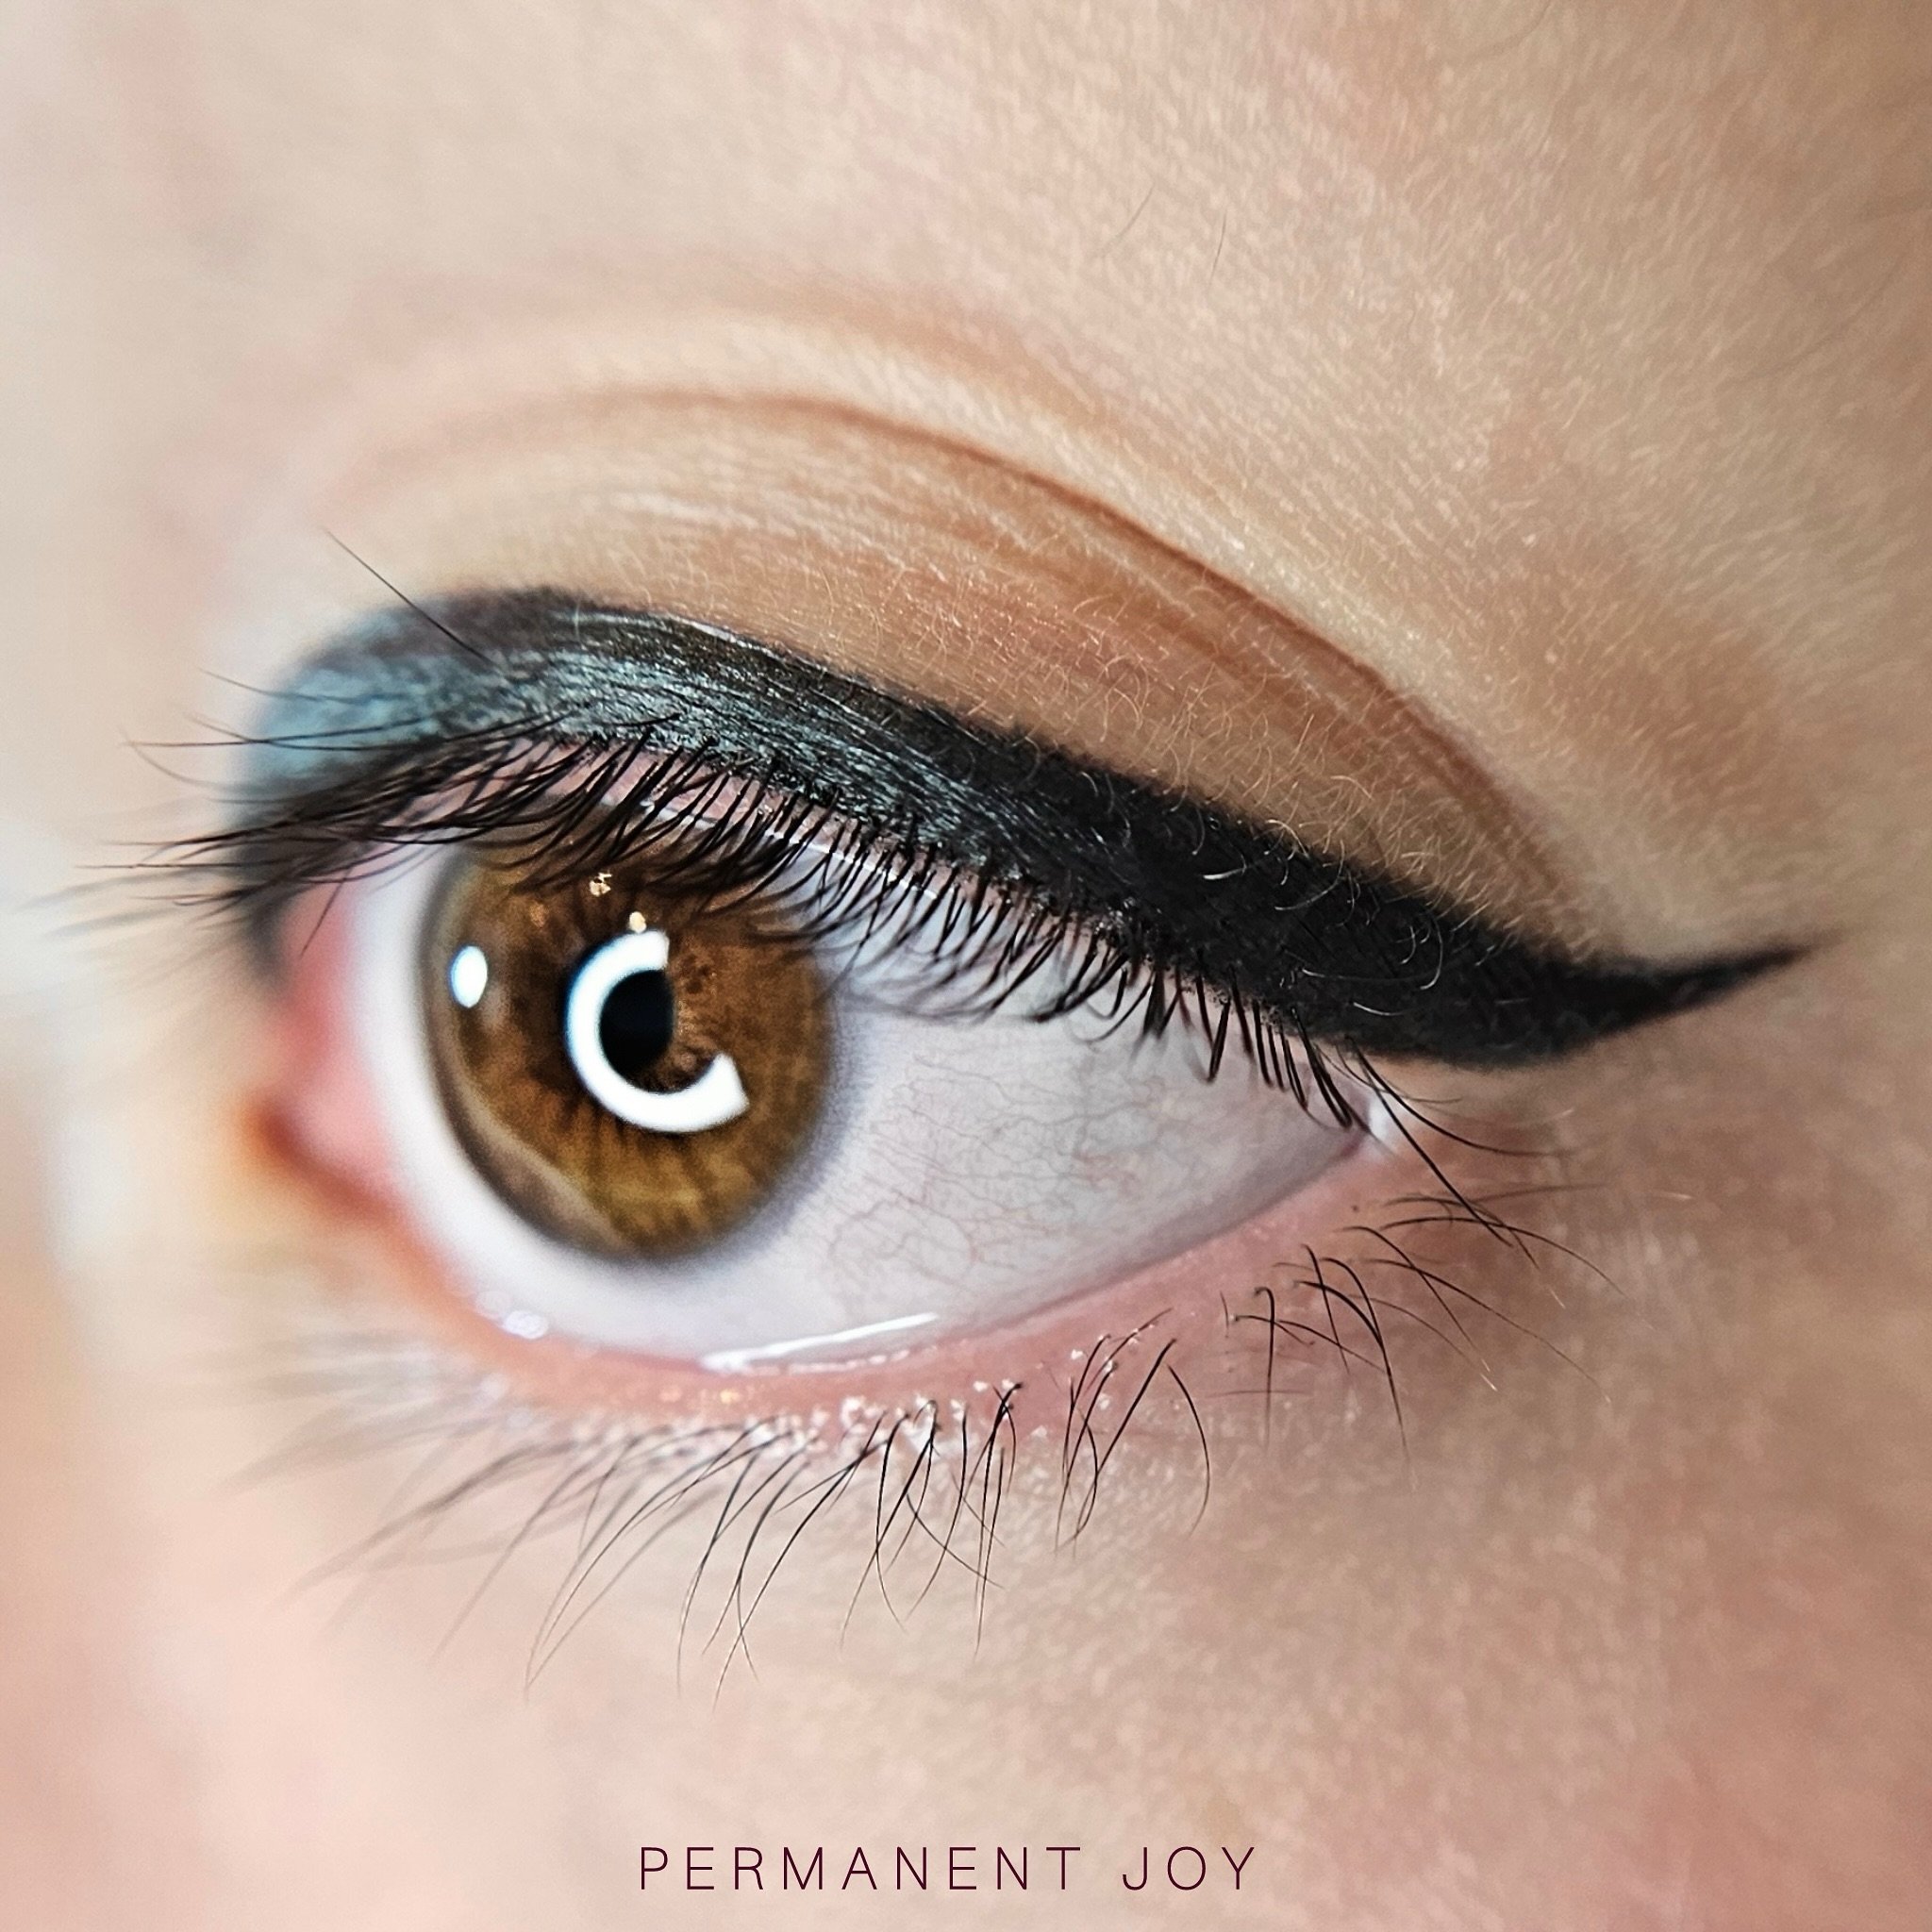 ✨ Classic Thick Eyeliner, After Touch Up! ✨

Just out of the studio and already showcasing what will be the healed look! Experience the transformative power of a classic winged eyeliner. Wide wings make a bold statement and simplify your daily makeup